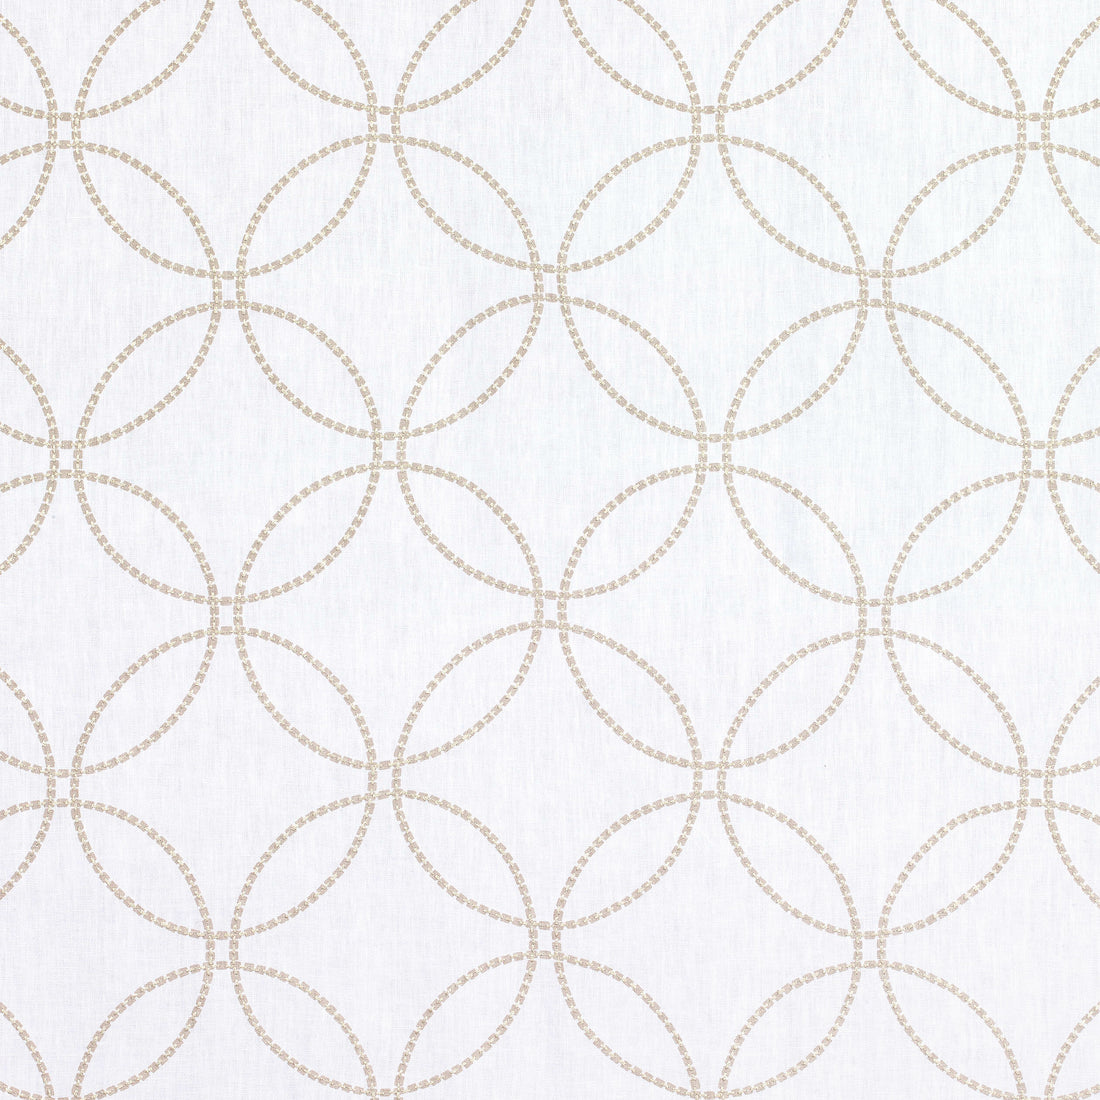 Ronda fabric in white color - pattern number AW9119 - by Anna French in the Natural Glimmer collection